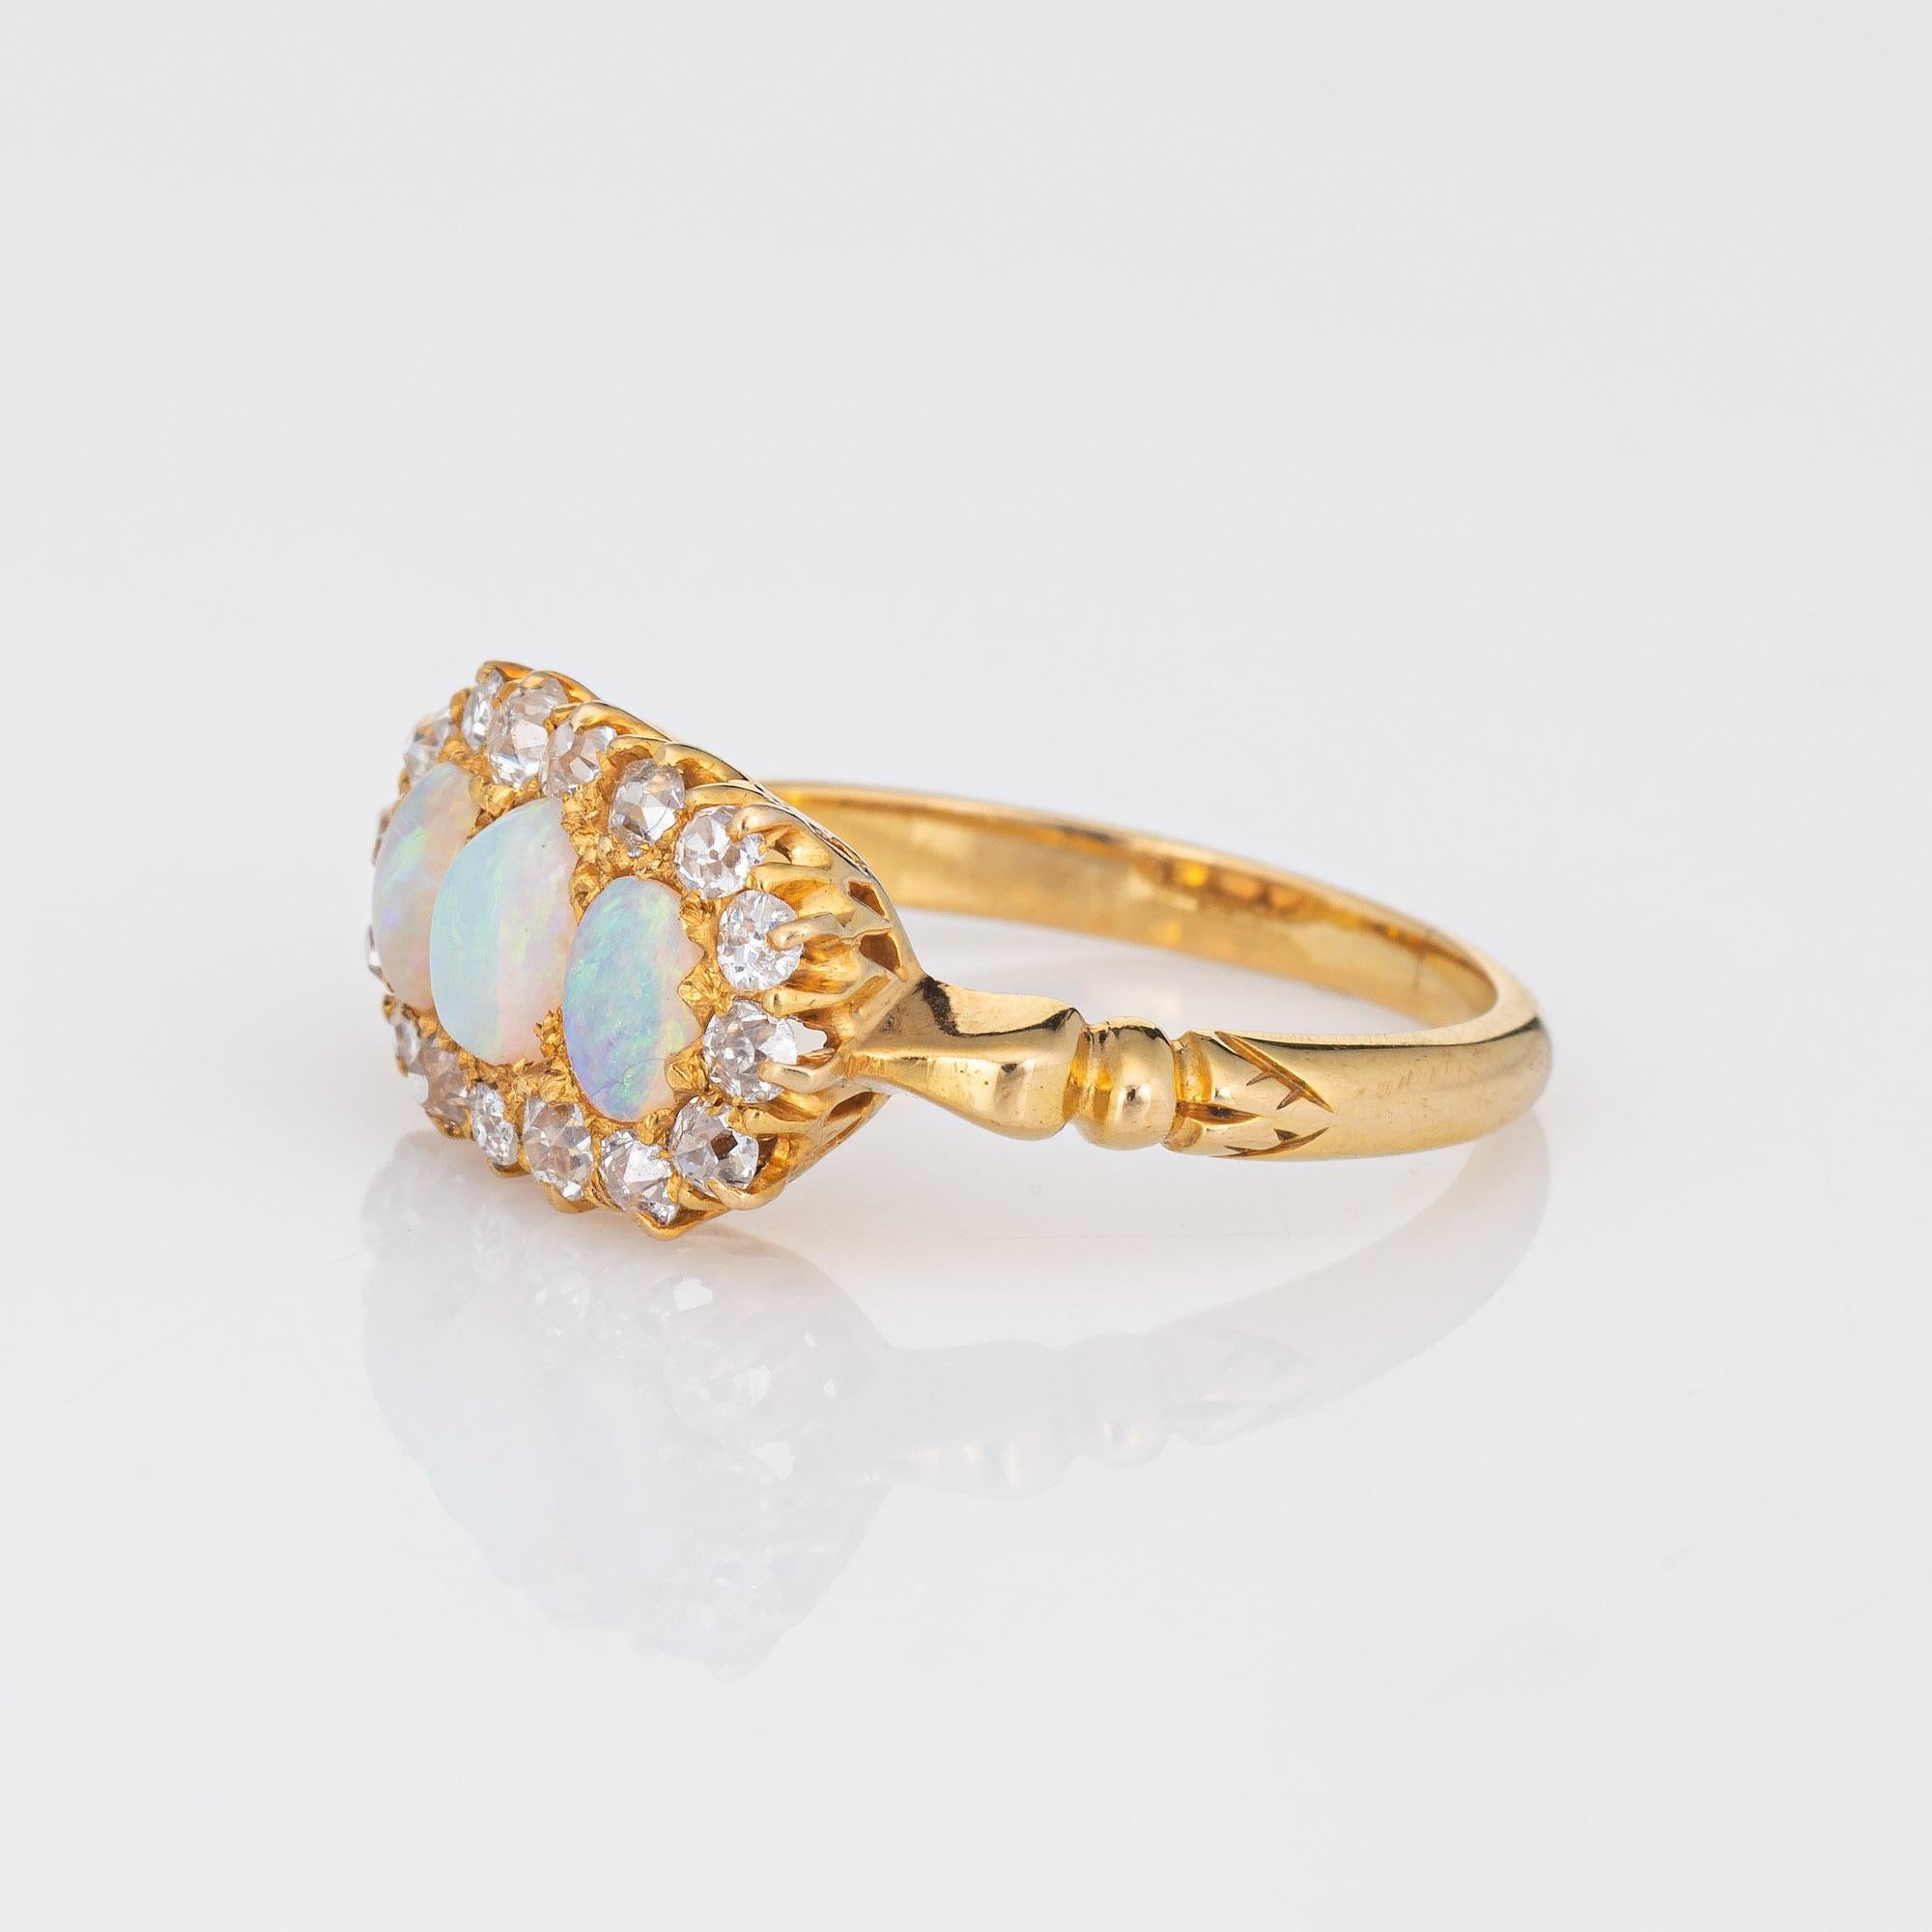 Cabochon Antique Victorian Opal Diamond Ring Trilogy 18k Yellow Gold Vintage Fine Jewelry